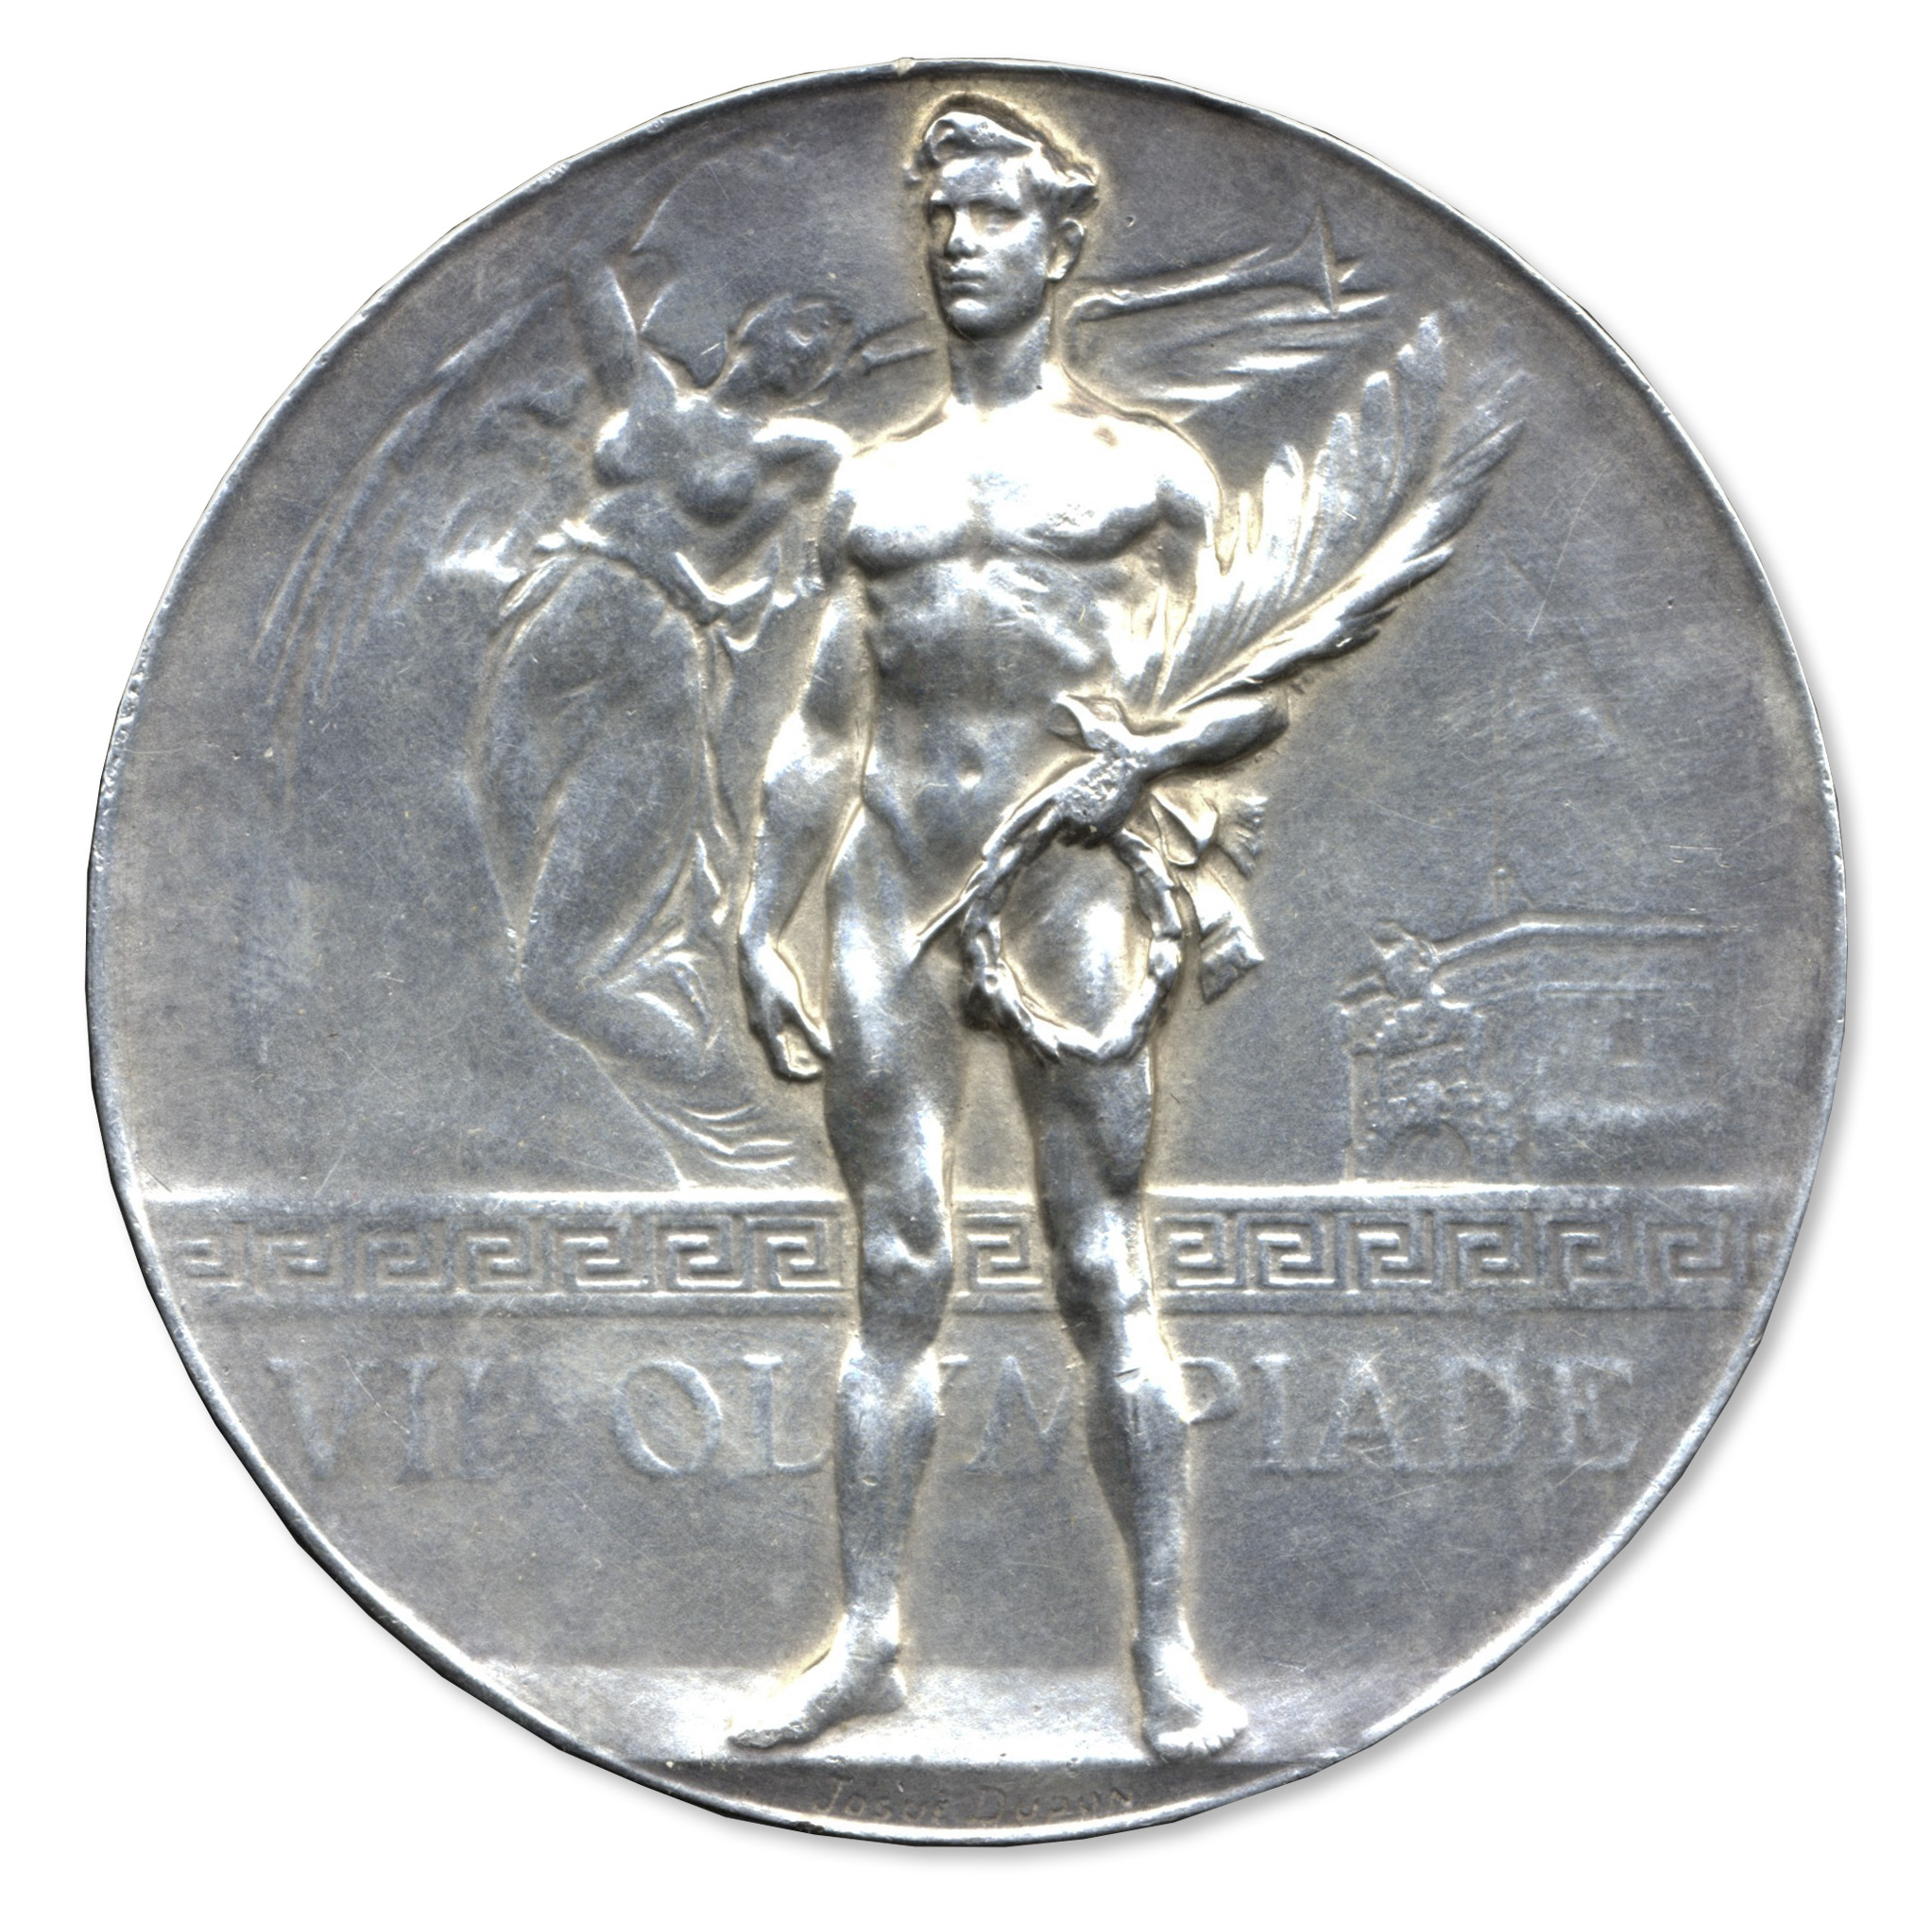 Olympics Memorabilia Silver Olympic Medal From the 1920 Summer Olympics, Held in Antwerp, Belgium - Image 3 of 4